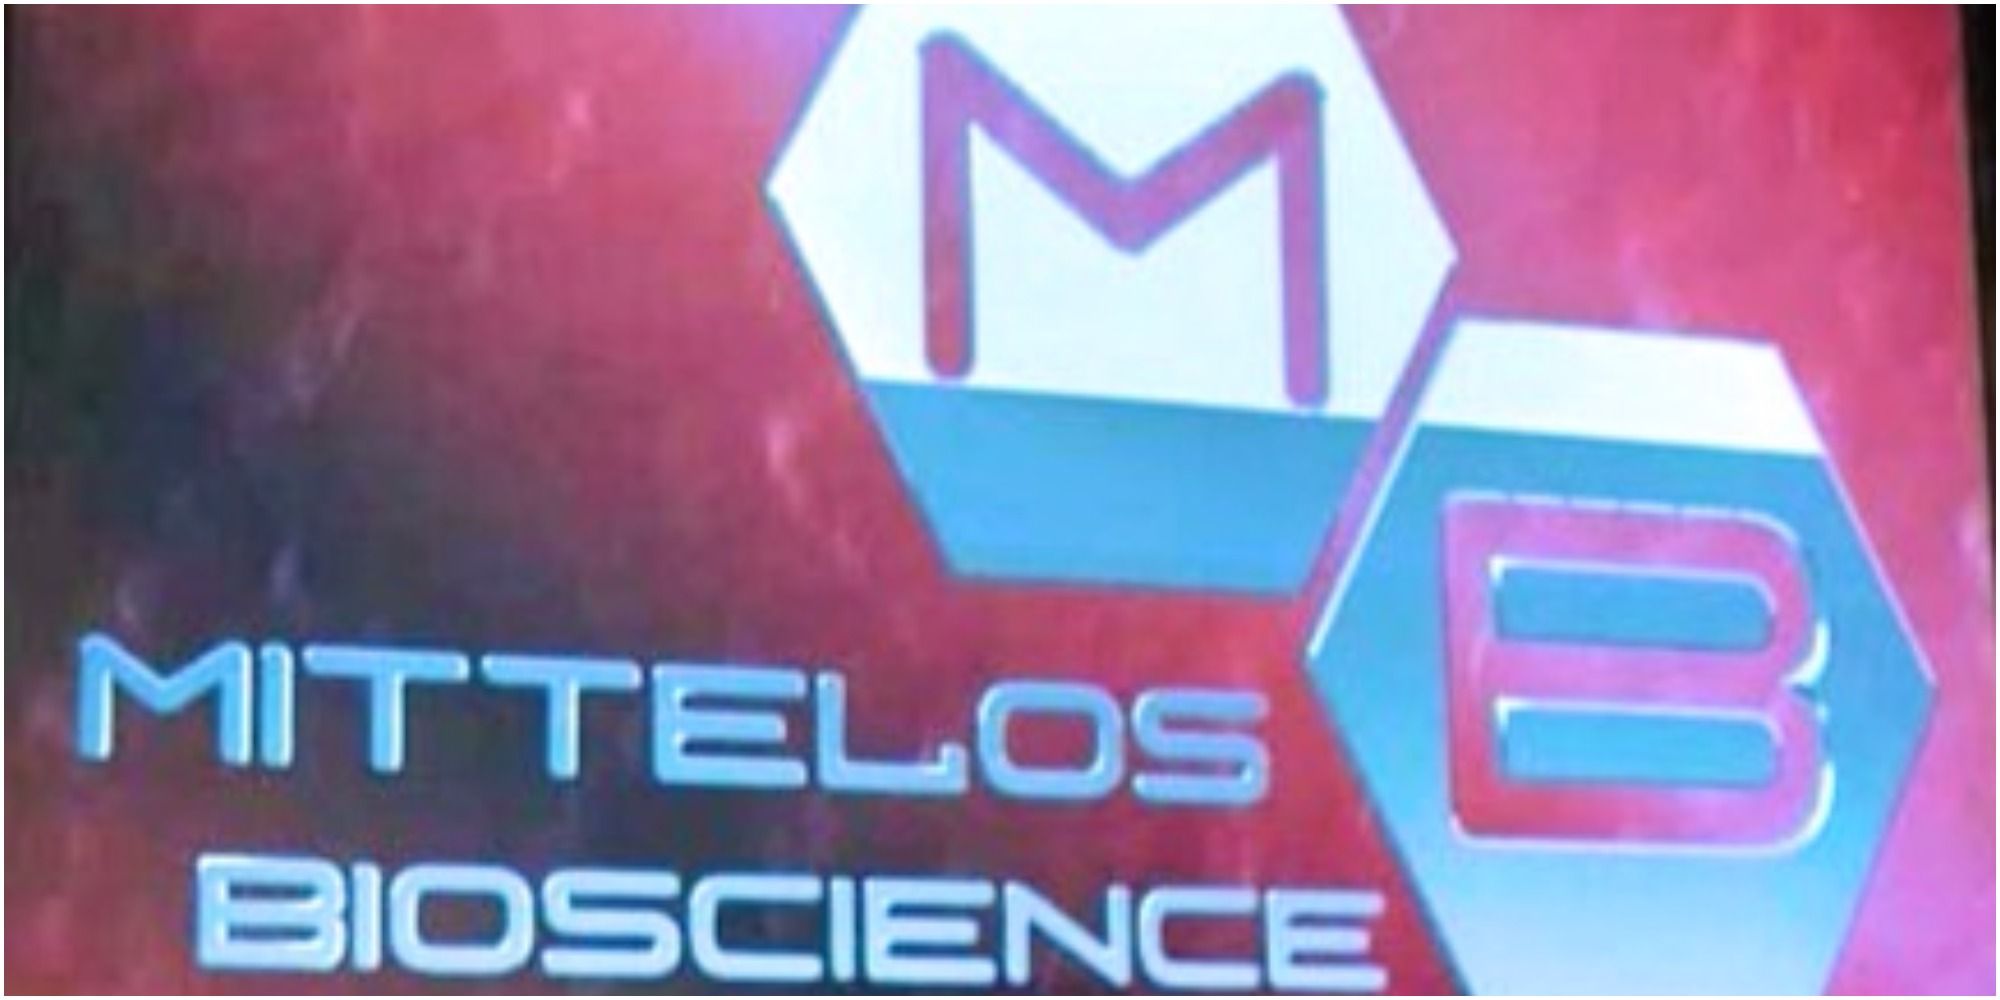 On Lost how did the Others have so much money, was it through their front company Mittelos Bioscience.